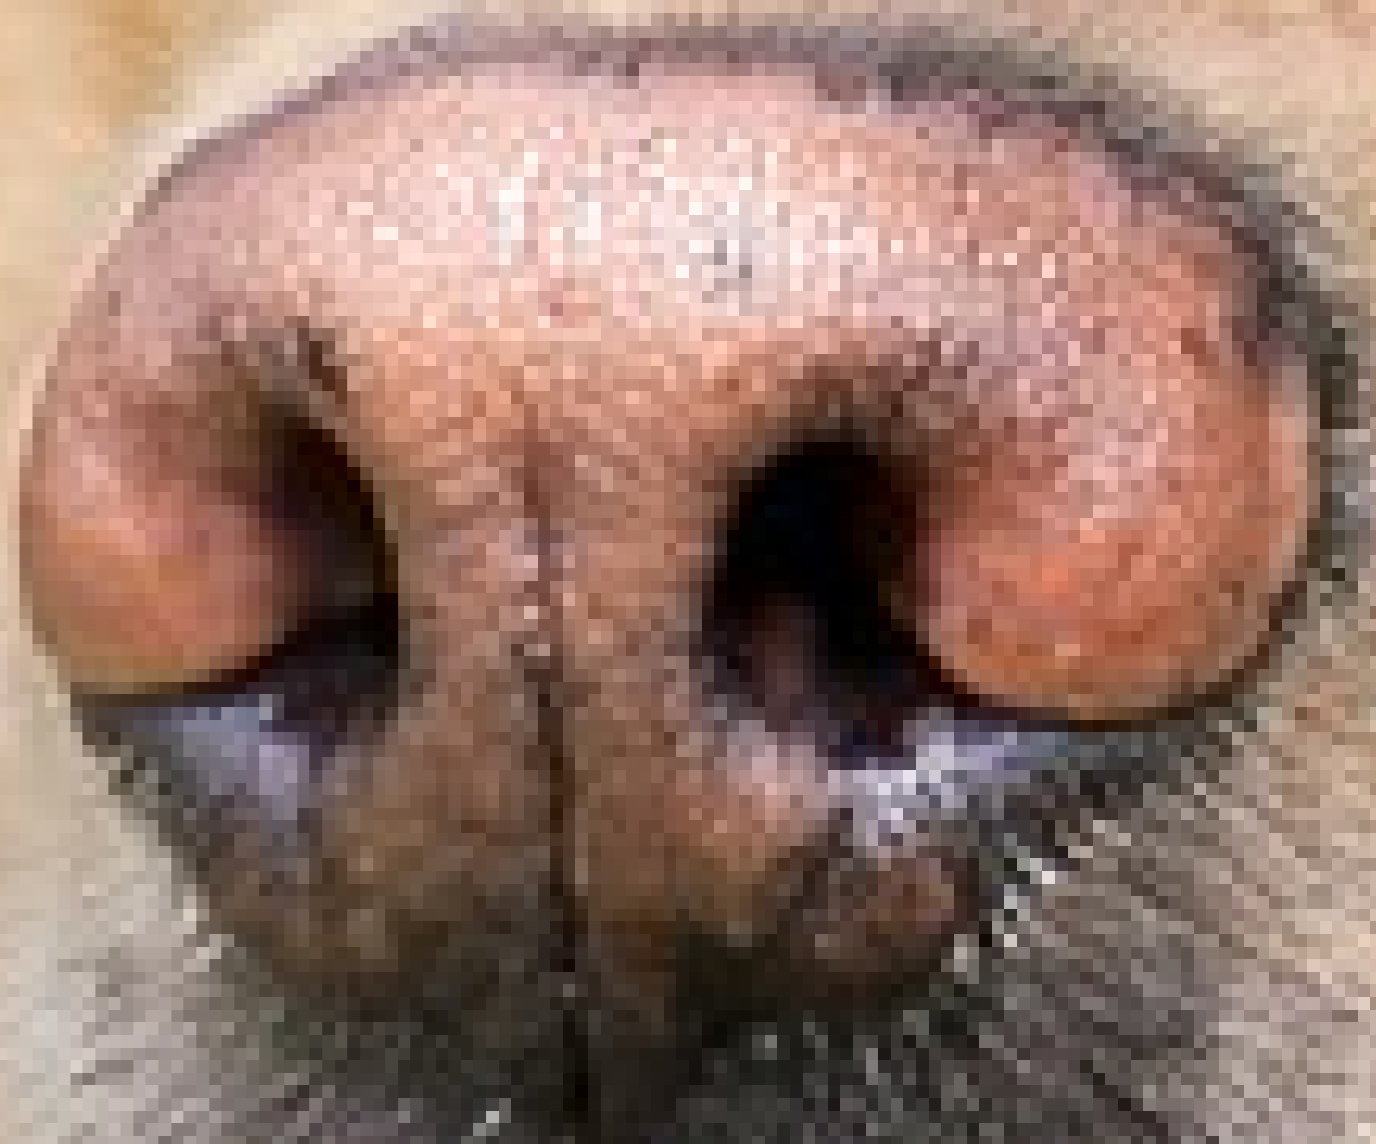 The nose of the dog.